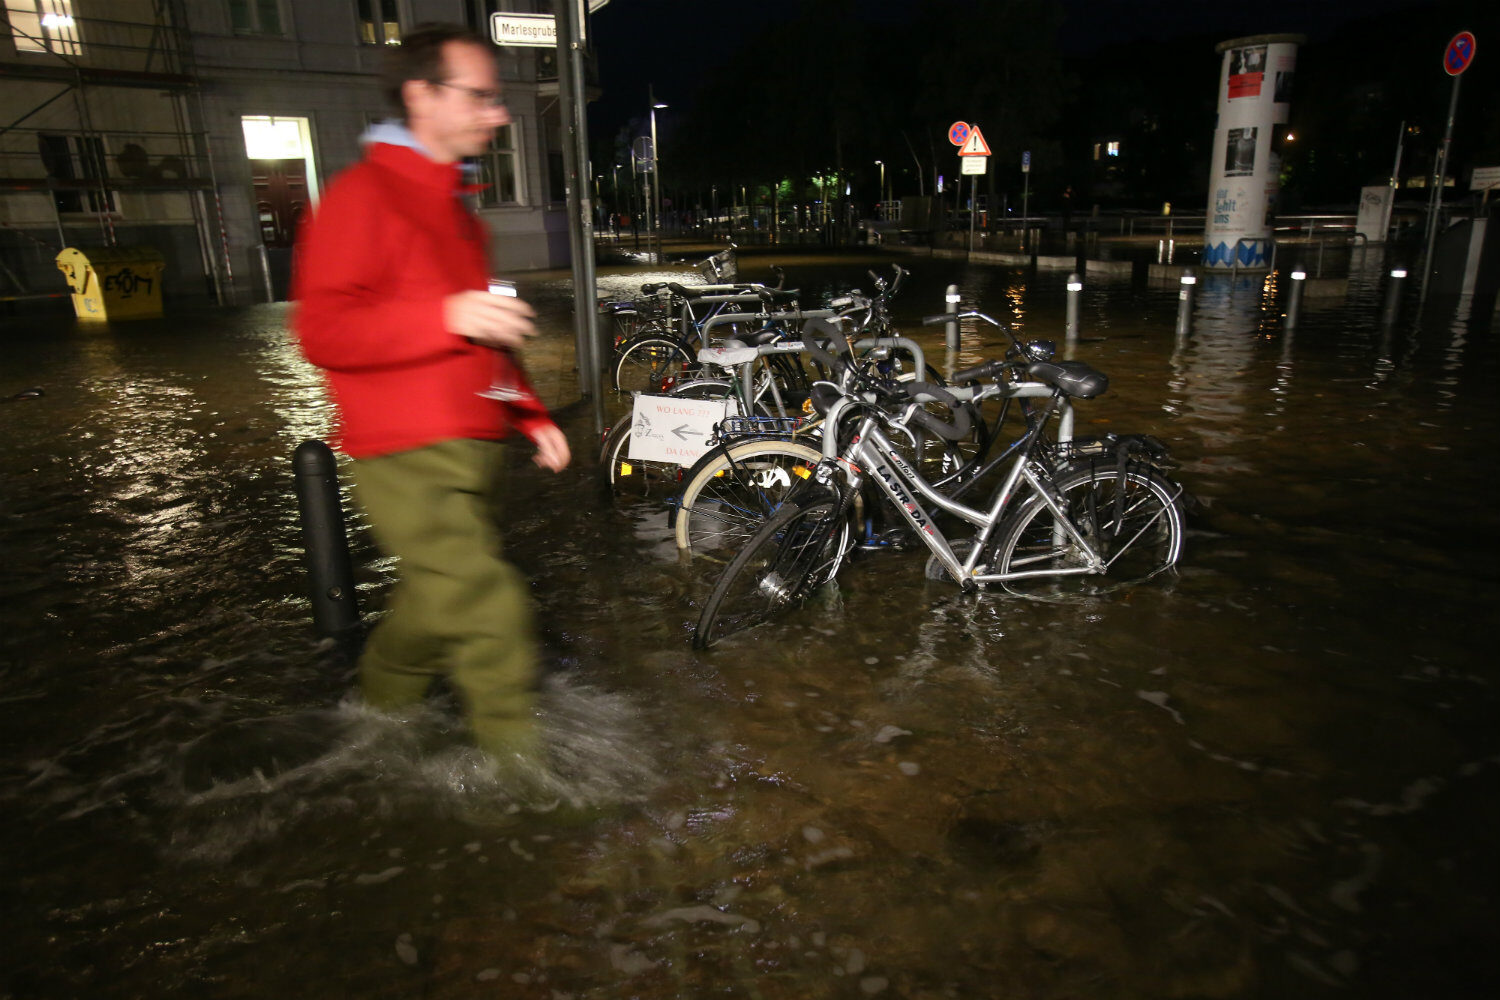 A man wading through the flooding in Lübeck.